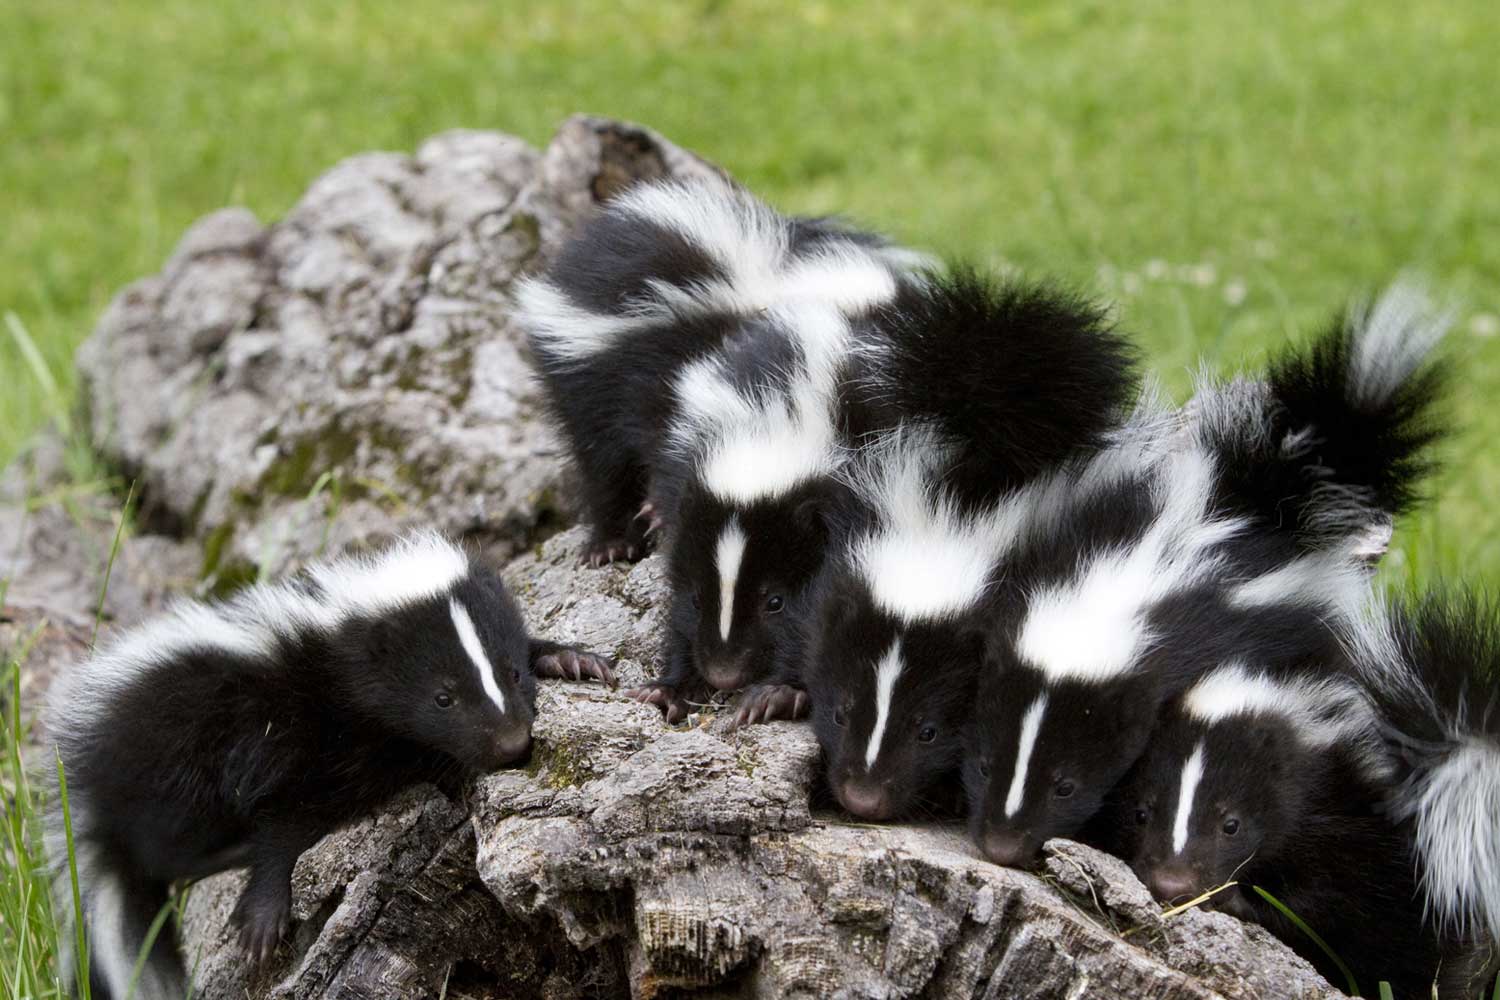 Five baby skunks on a fallen log in the grass.